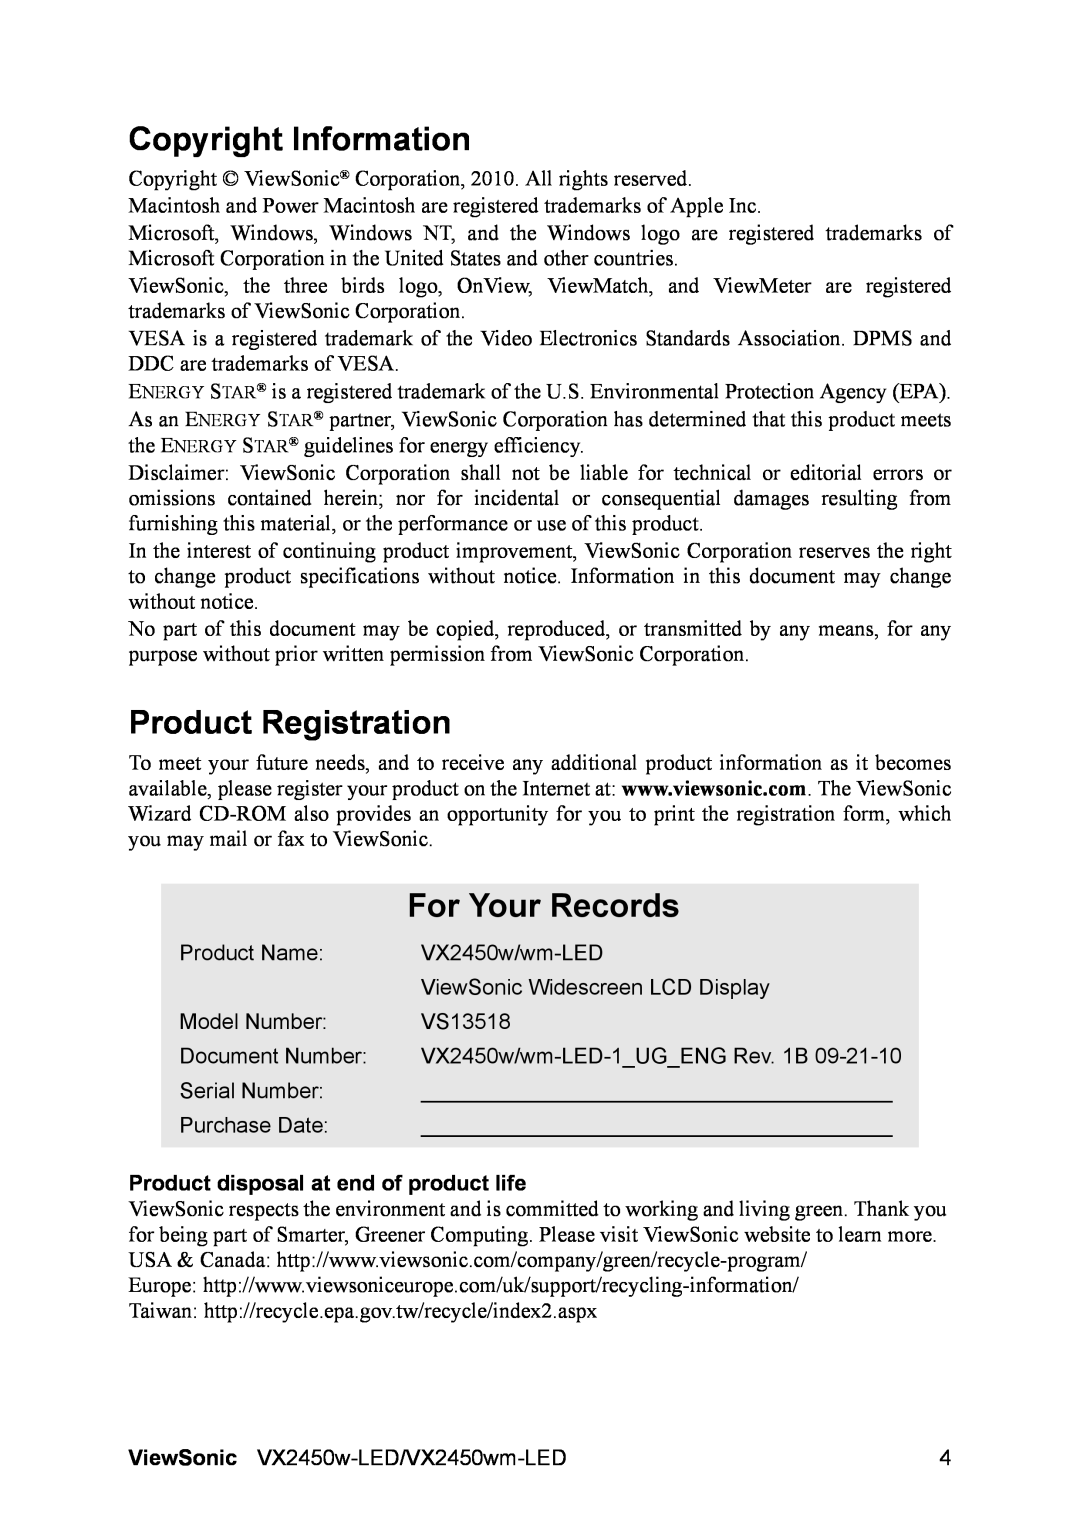 ViewSonic VS13518 Copyright Information, Product Registration, For Your Records, Product disposal at end of product life 